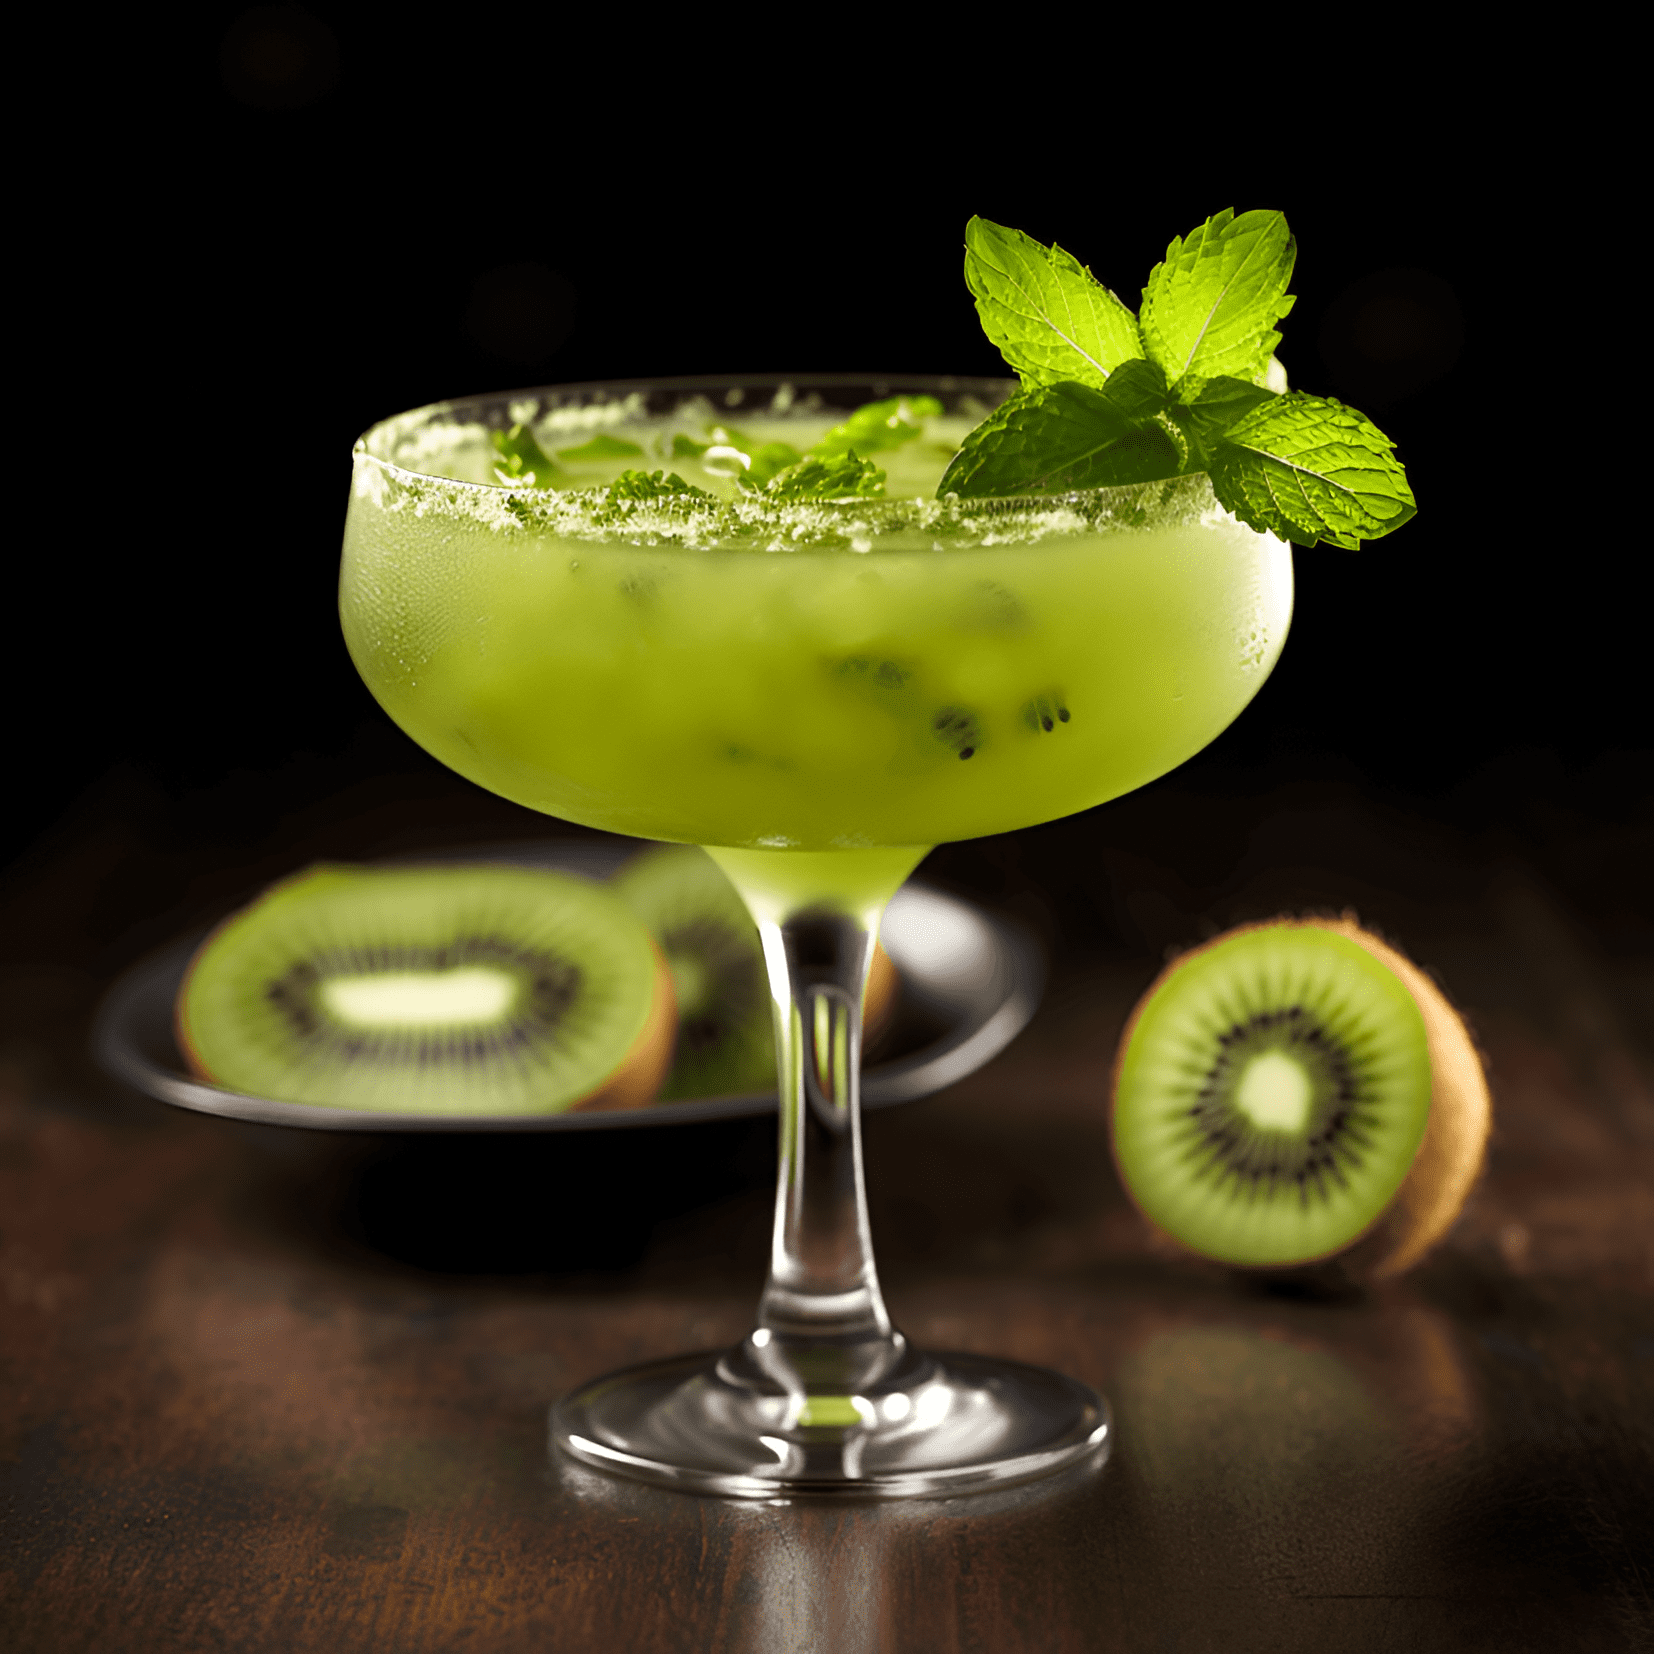 Kiwi Cocktail Recipe - The Kiwi Cocktail offers a delightful balance of sweet and sour flavors, with a hint of tanginess from the kiwi fruit. It is light and refreshing, with a fruity aroma and a smooth finish.